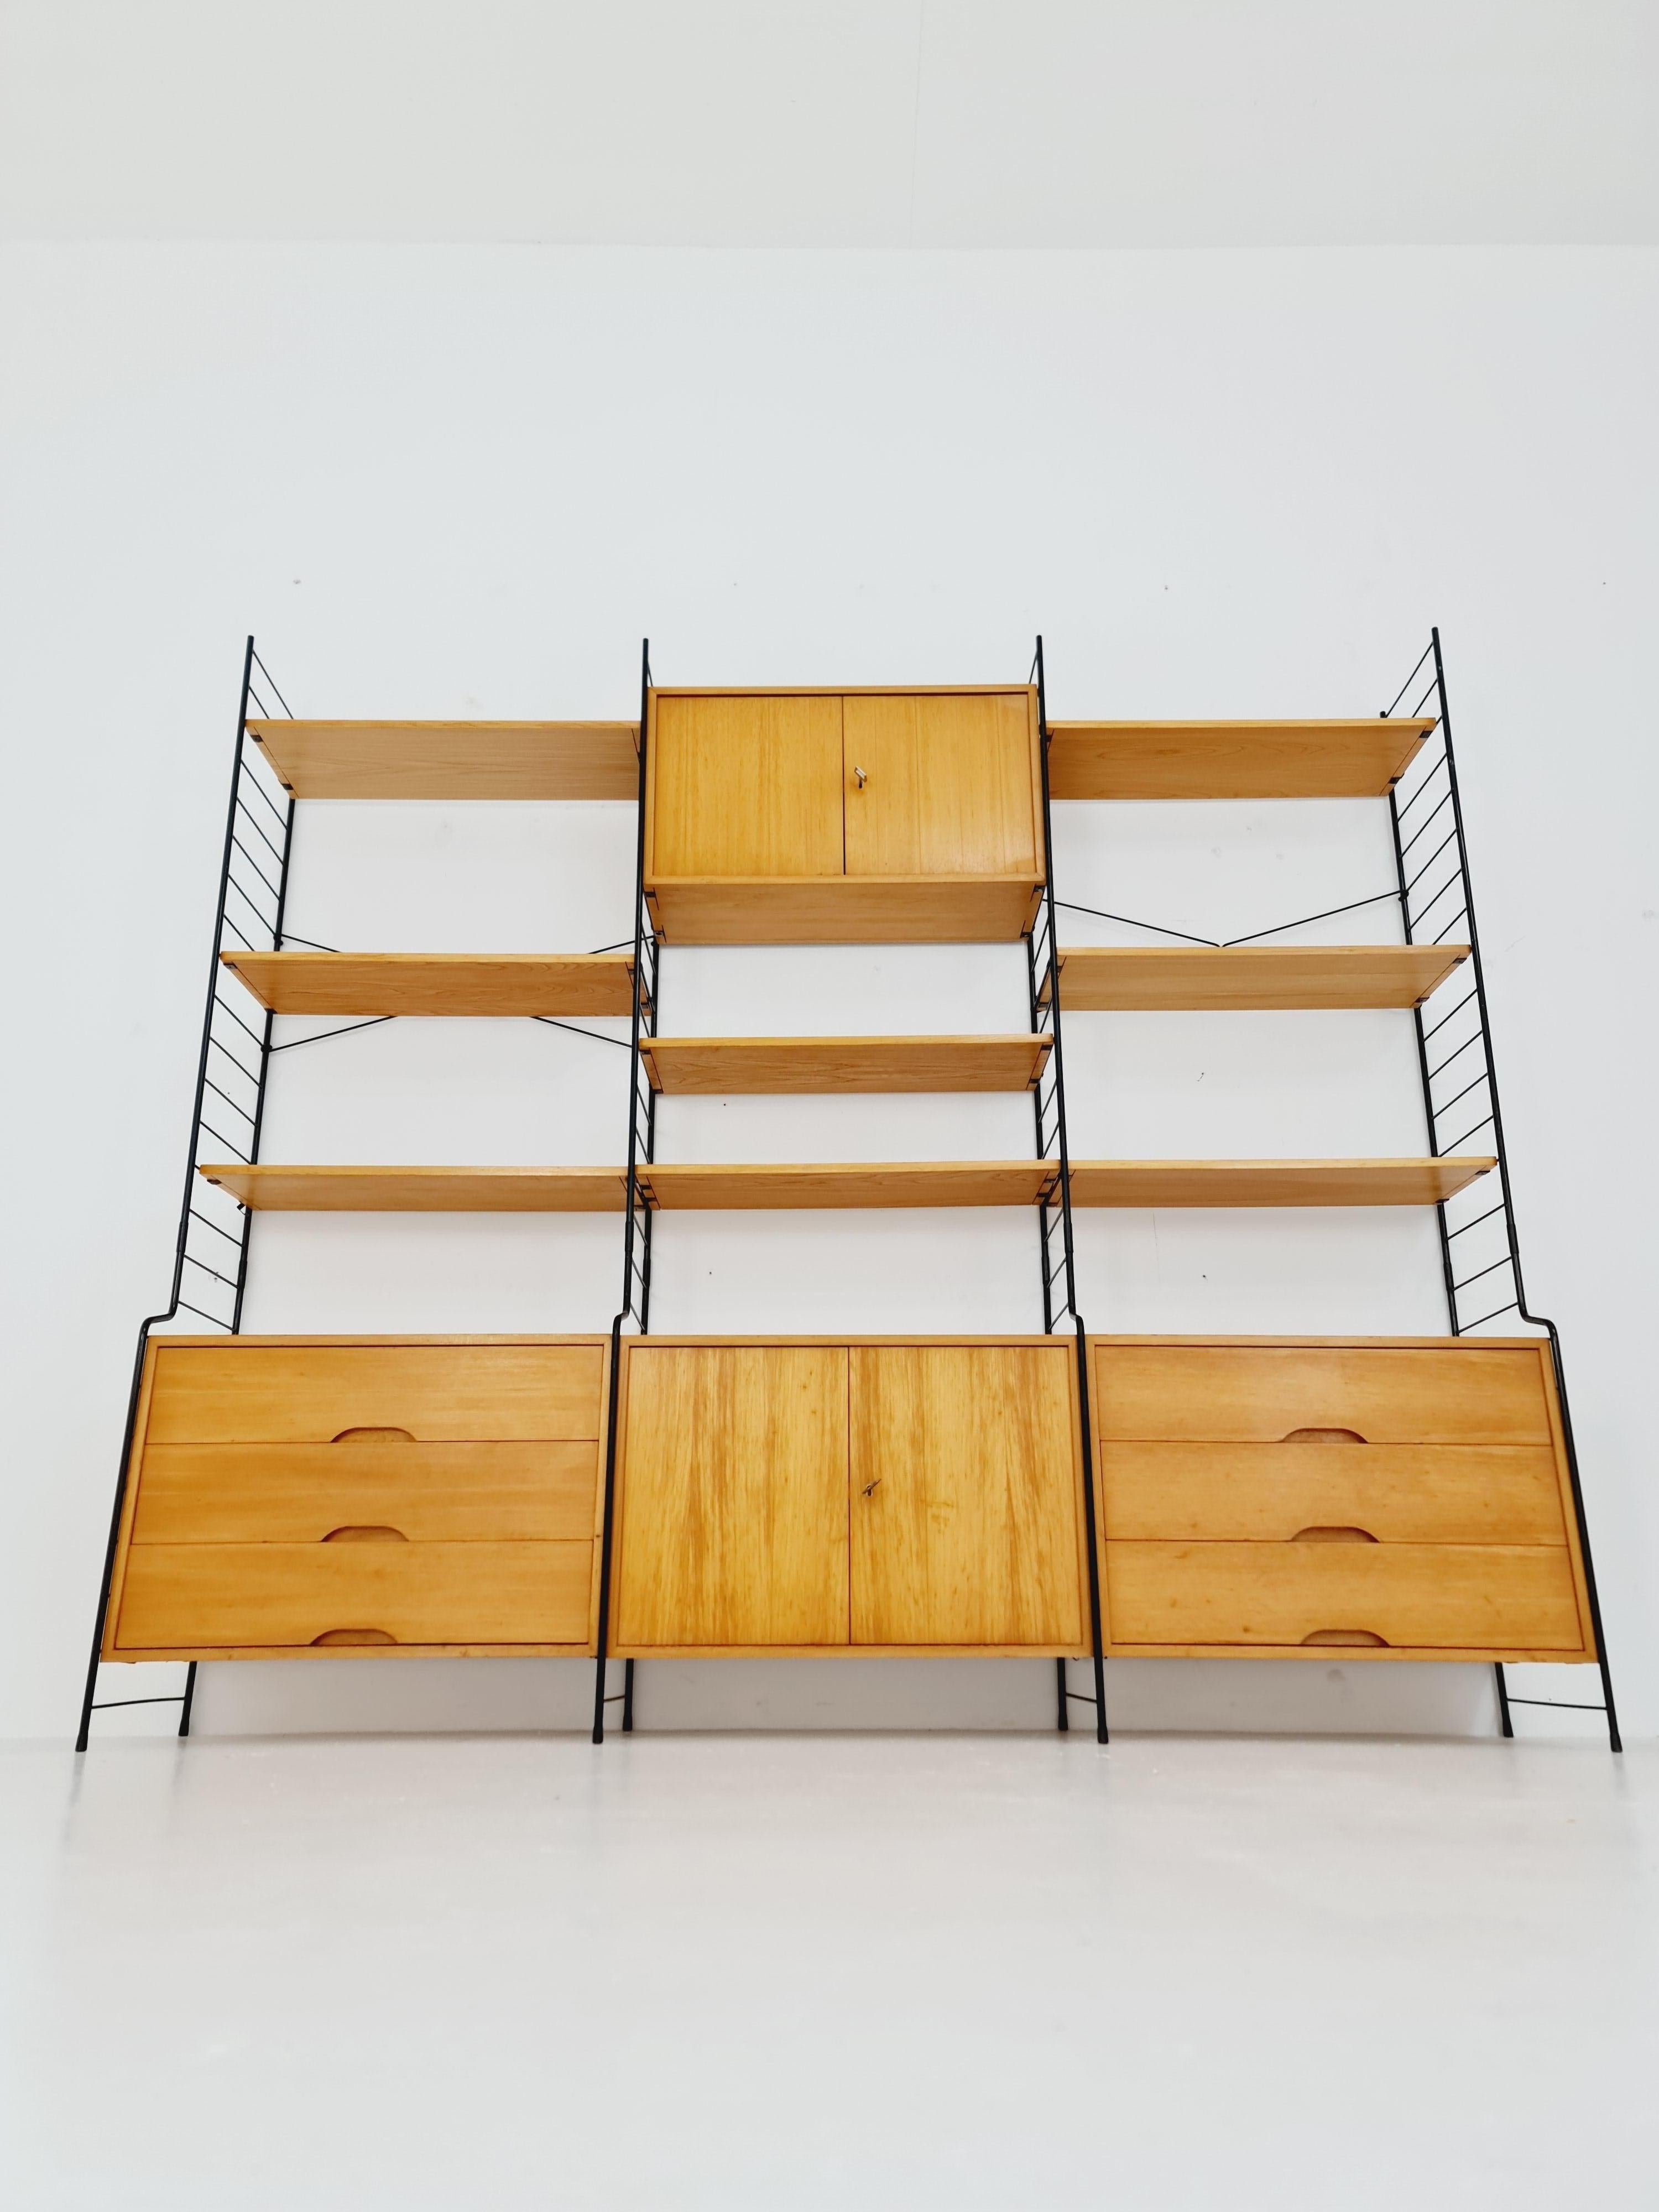 Mid century String shelf-system, bookcase with lighting Oak by WHB Germany, 1950s

Measurements:
Height : 190 cm
Width : 217 cm
Depth : 42 cm

Please inquiry for prices to your country before buying.

A wooden crate may be used for intercontinental